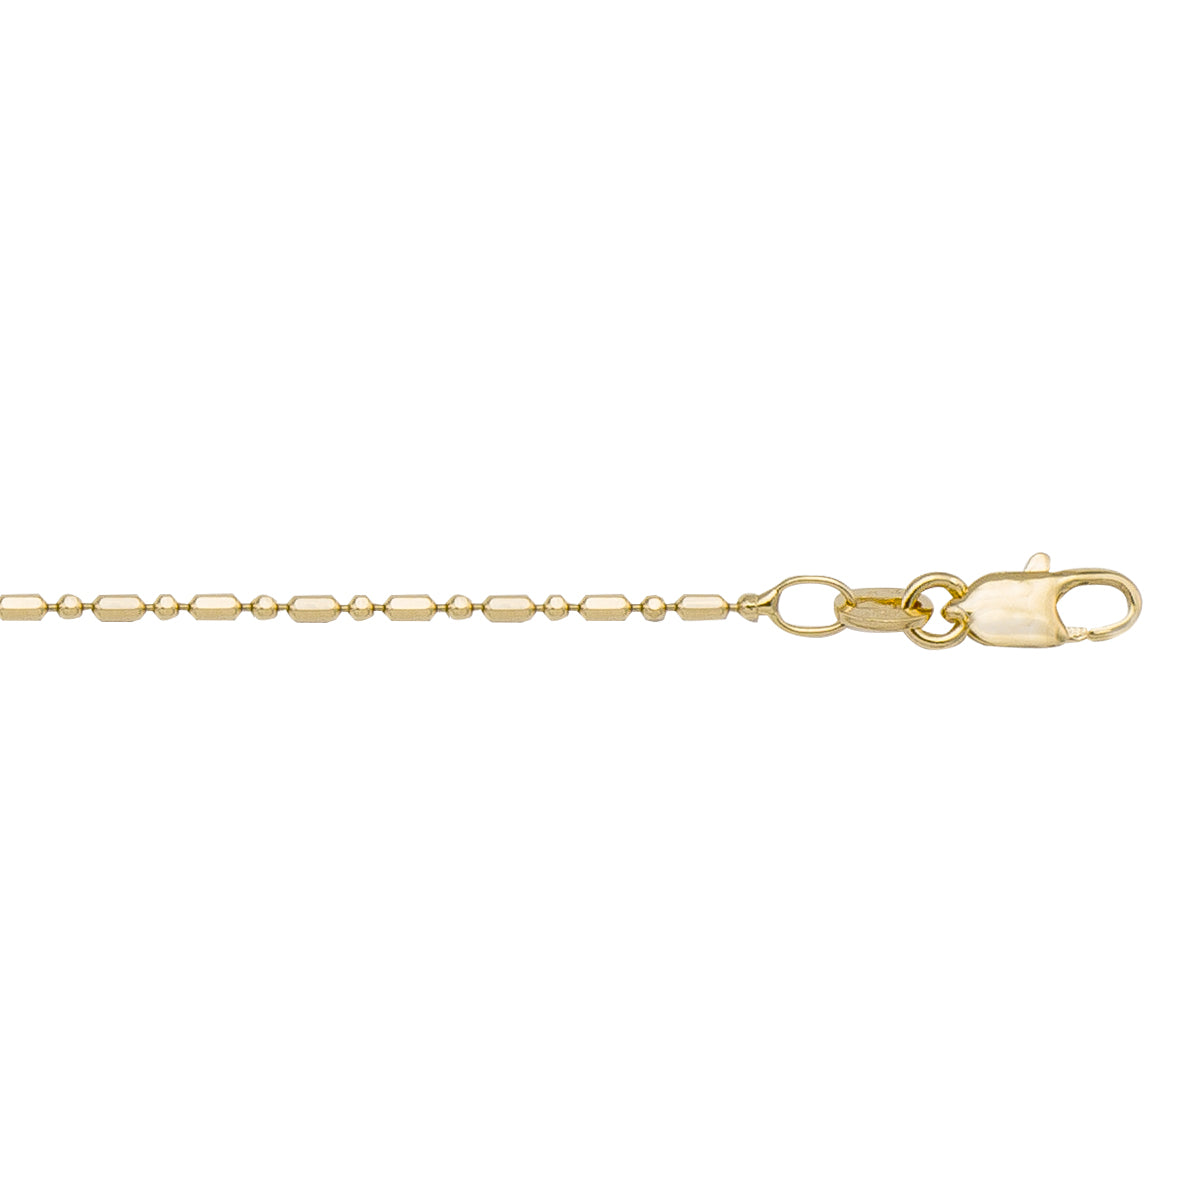 CHAINS YELLOW GOLD STATION BEAD LINK 